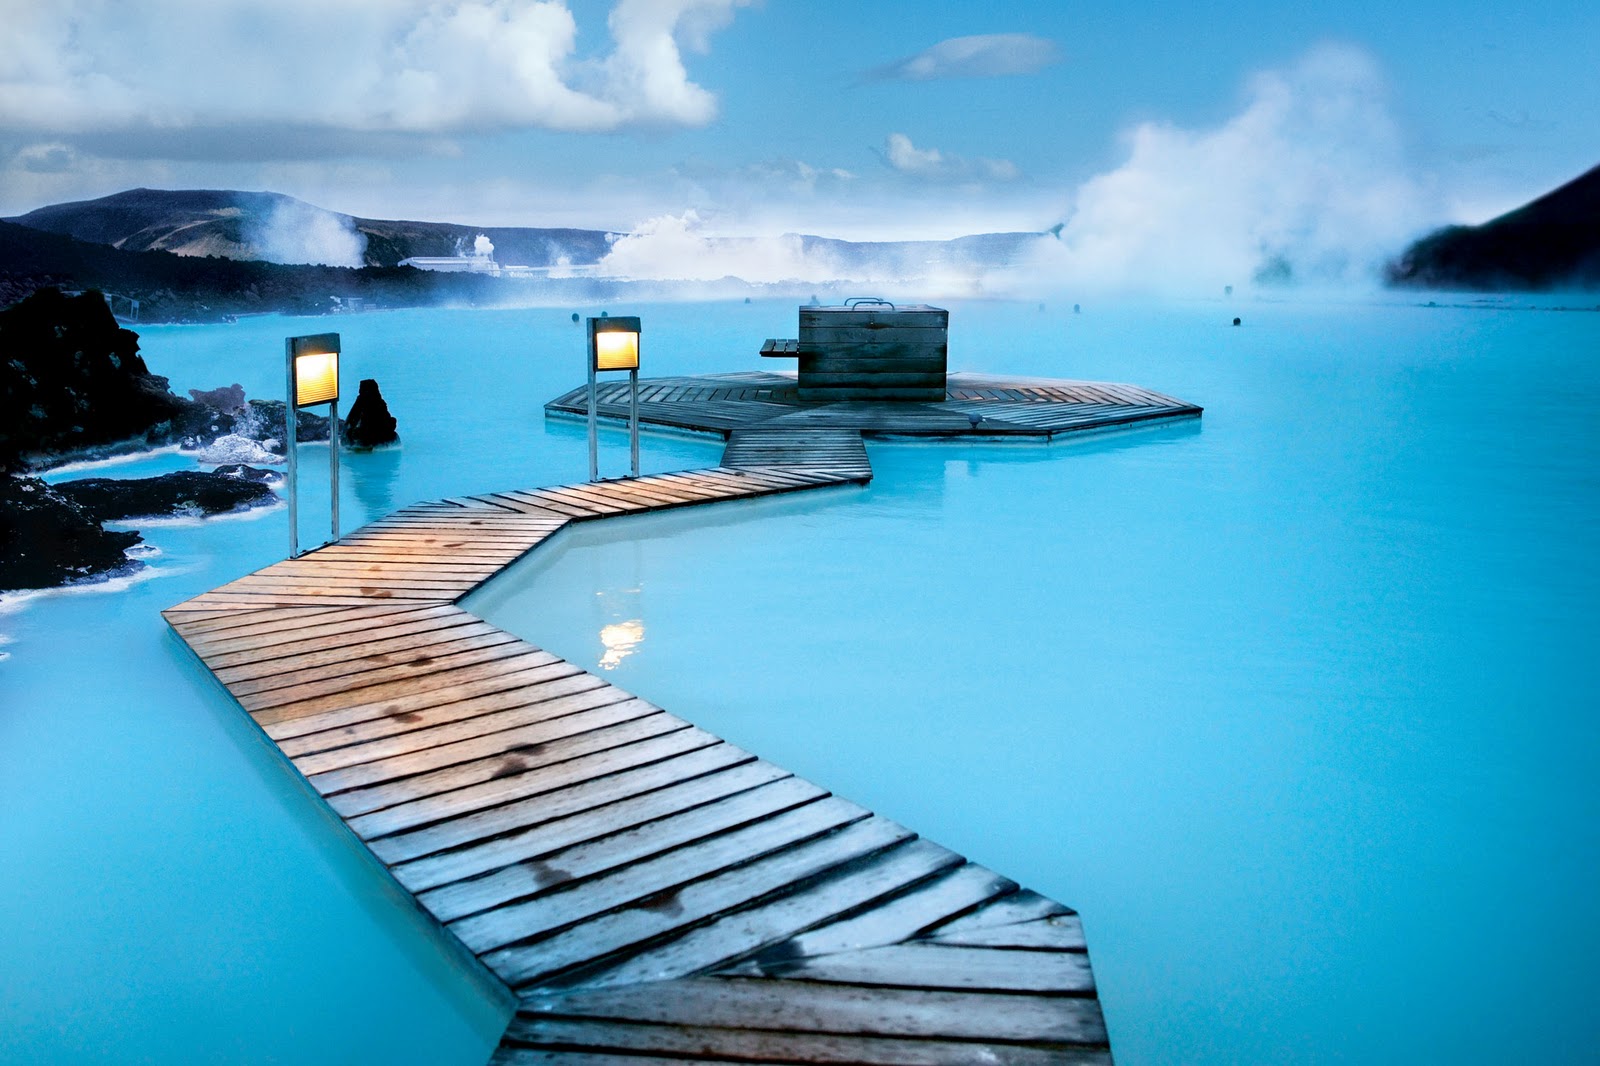 Blue Lagoon, A Geothermal spa in Iceland - Travelling Moods1600 x 1066